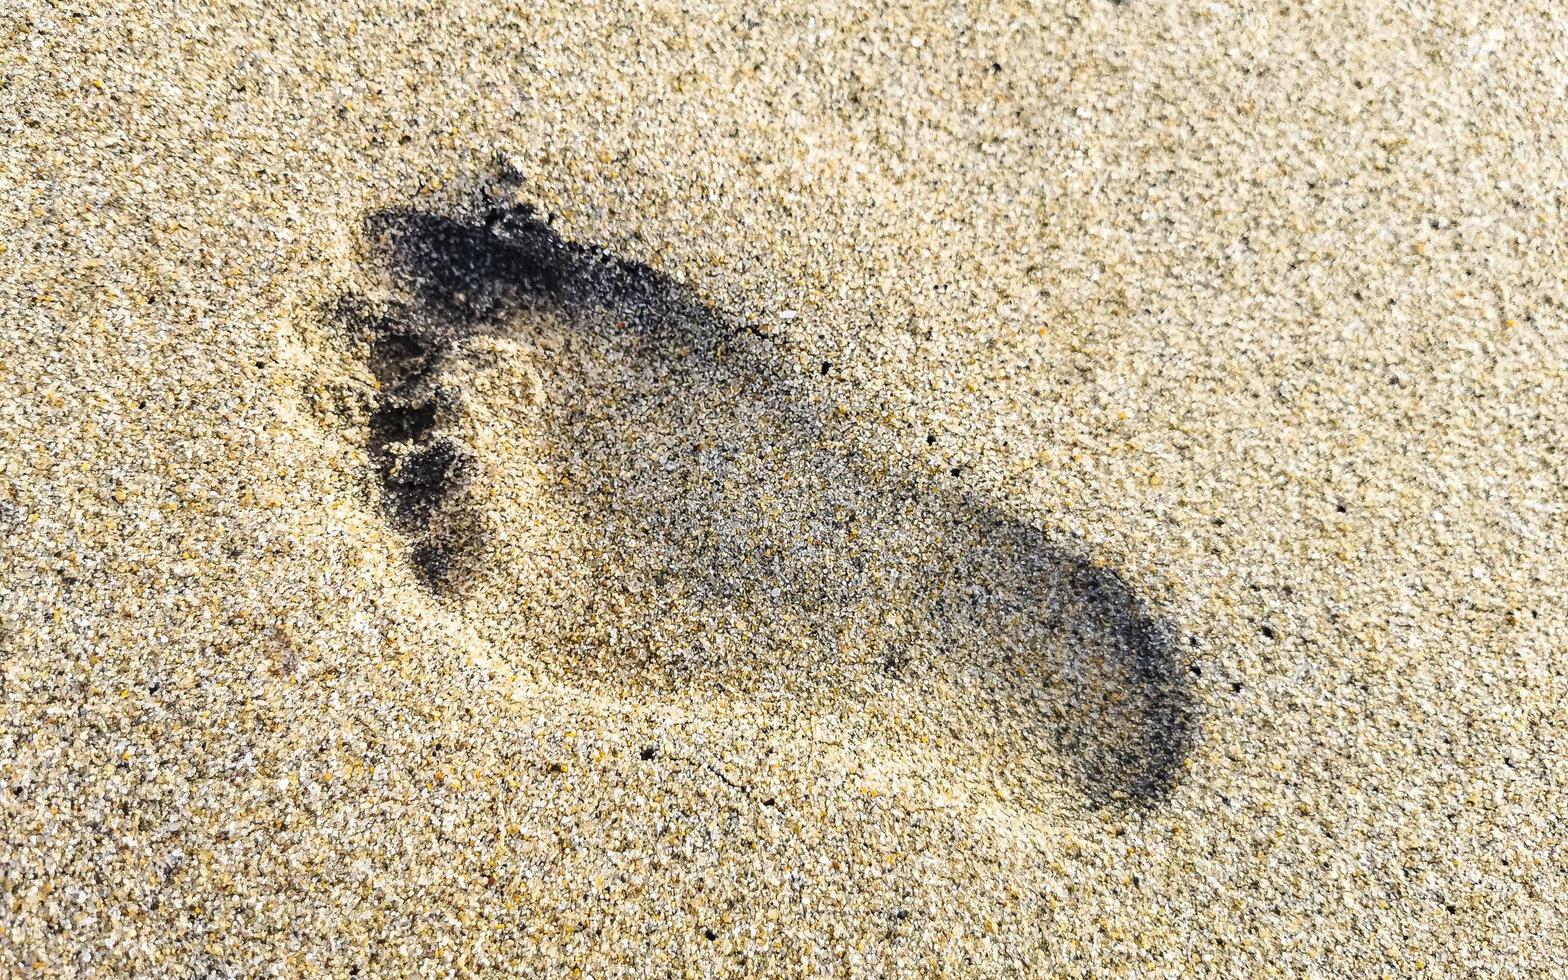 Footprint footprints on the beach sand by the water Mexico. photo